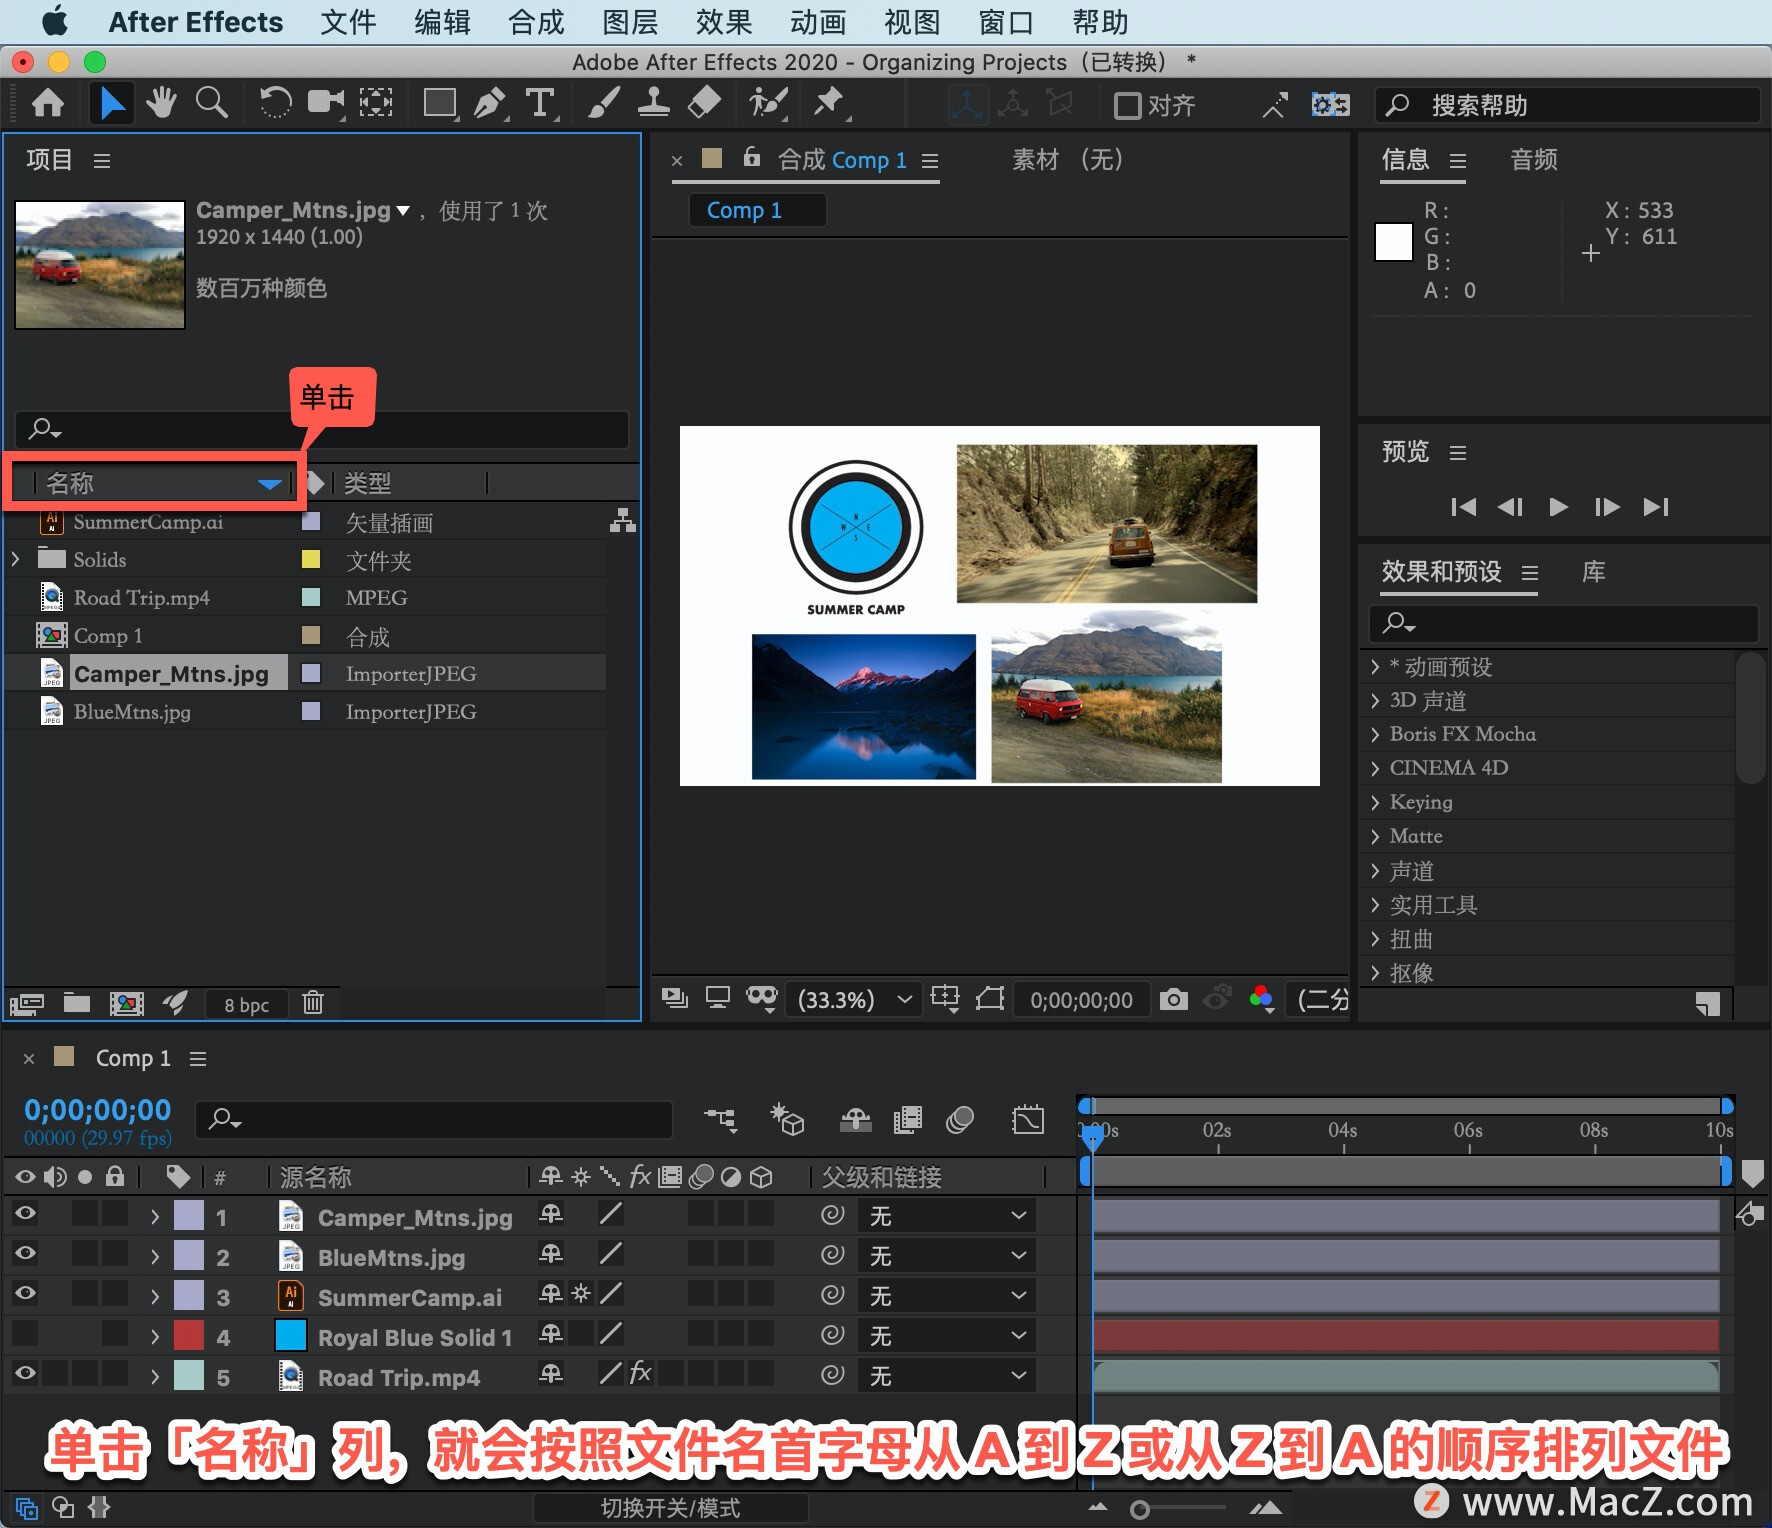 After Effects 教程「4」，如何在 After Effects 中整理项目？